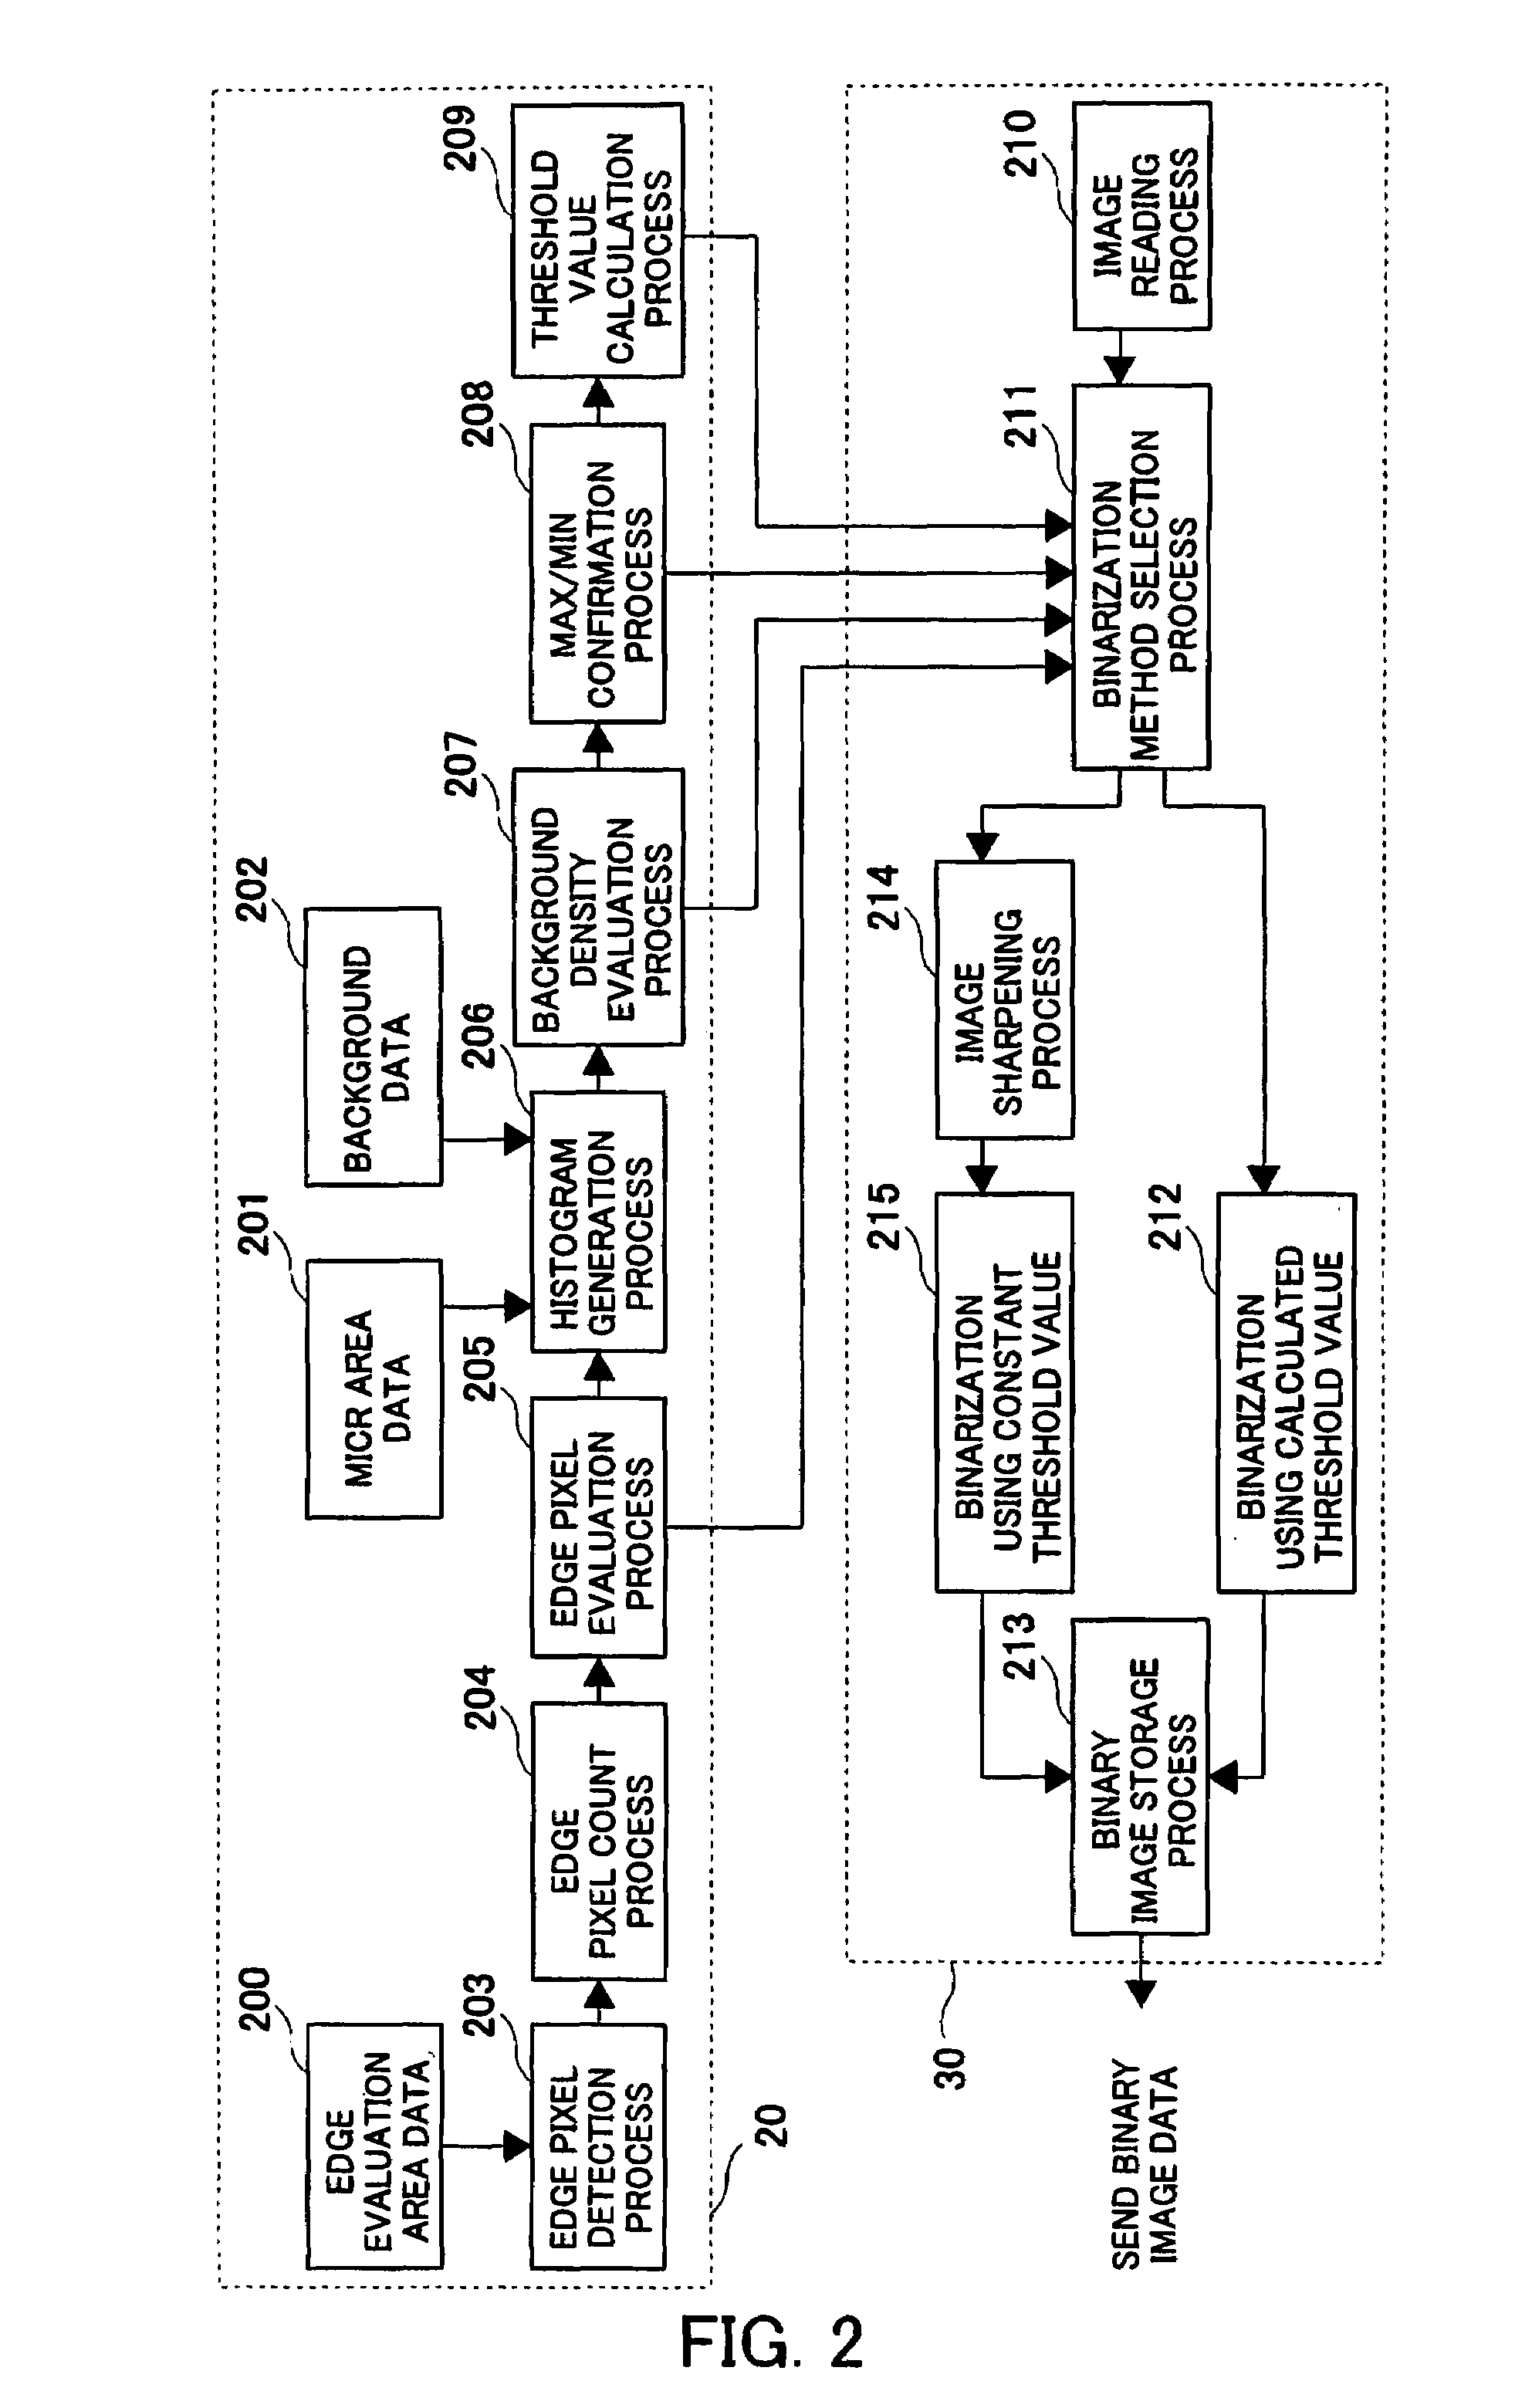 Apparatus and method for binarizing images of negotiable instruments using a binarization method chosen based on an image of a partial area